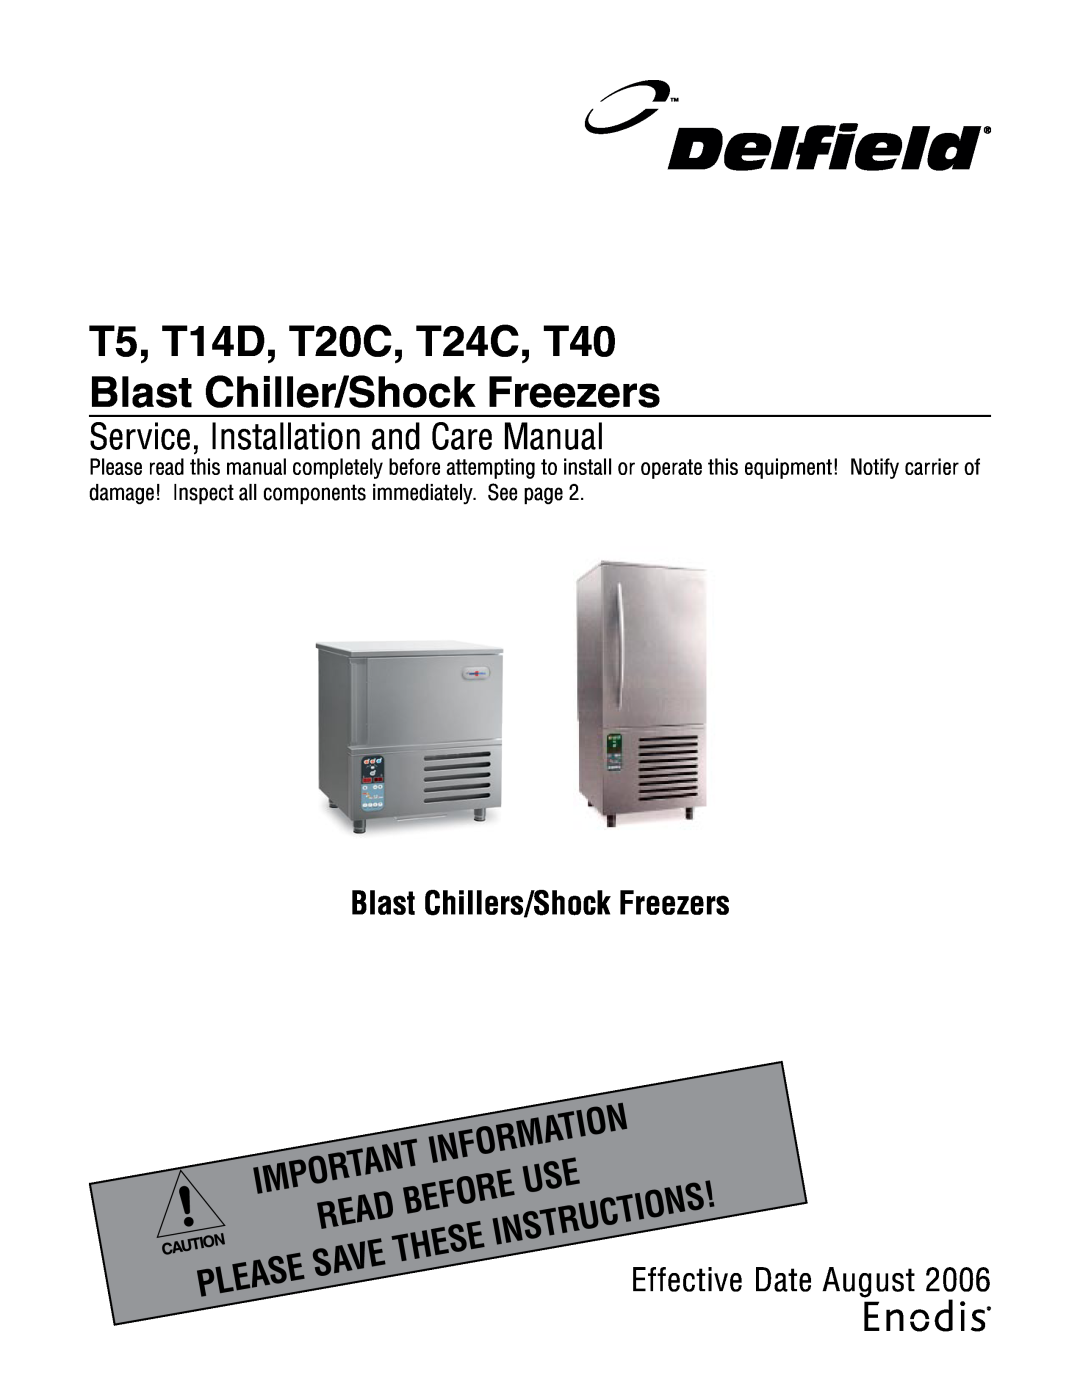 Delfield manual T5, T14D, T20C, T24C, T40 Blast Chiller/Shock Freezers, Service, Installation and Care Manual, Read 